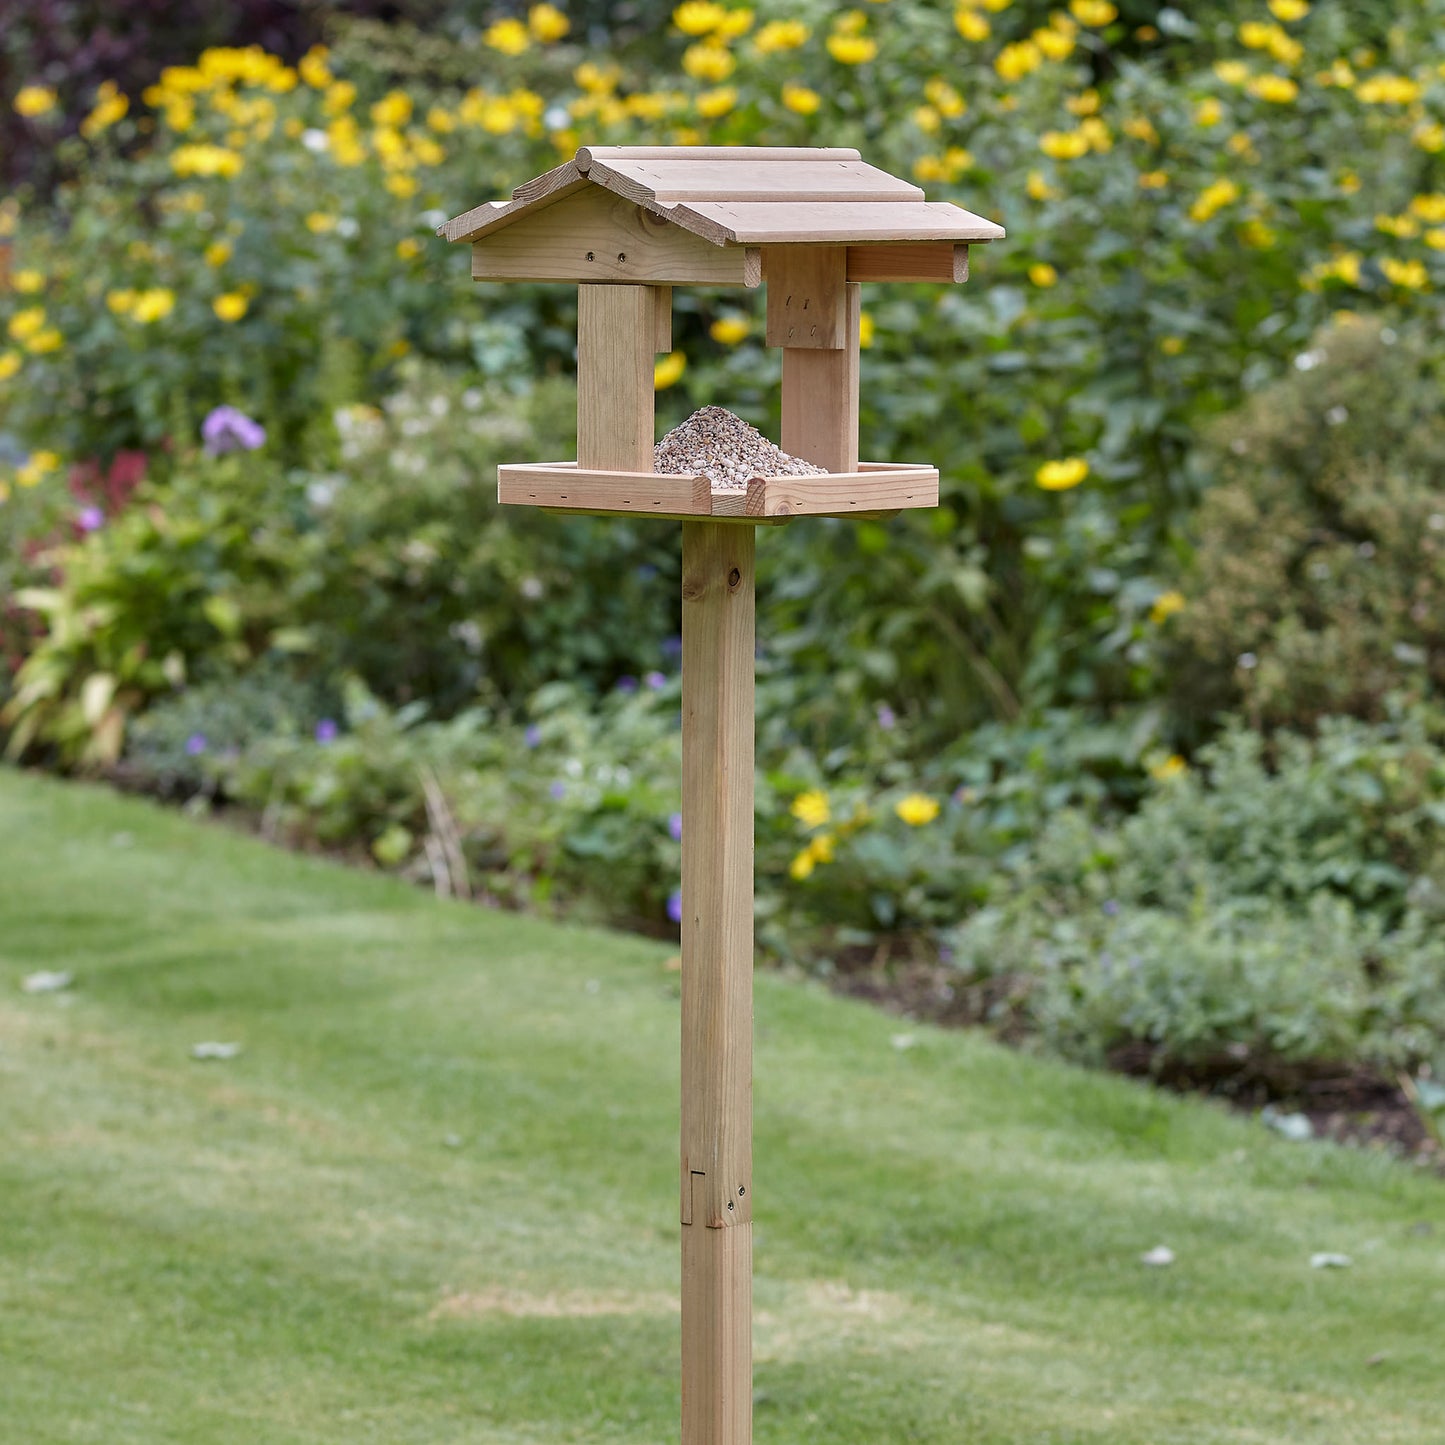 Peckish Everyday Garden Bird Table with seed mix on